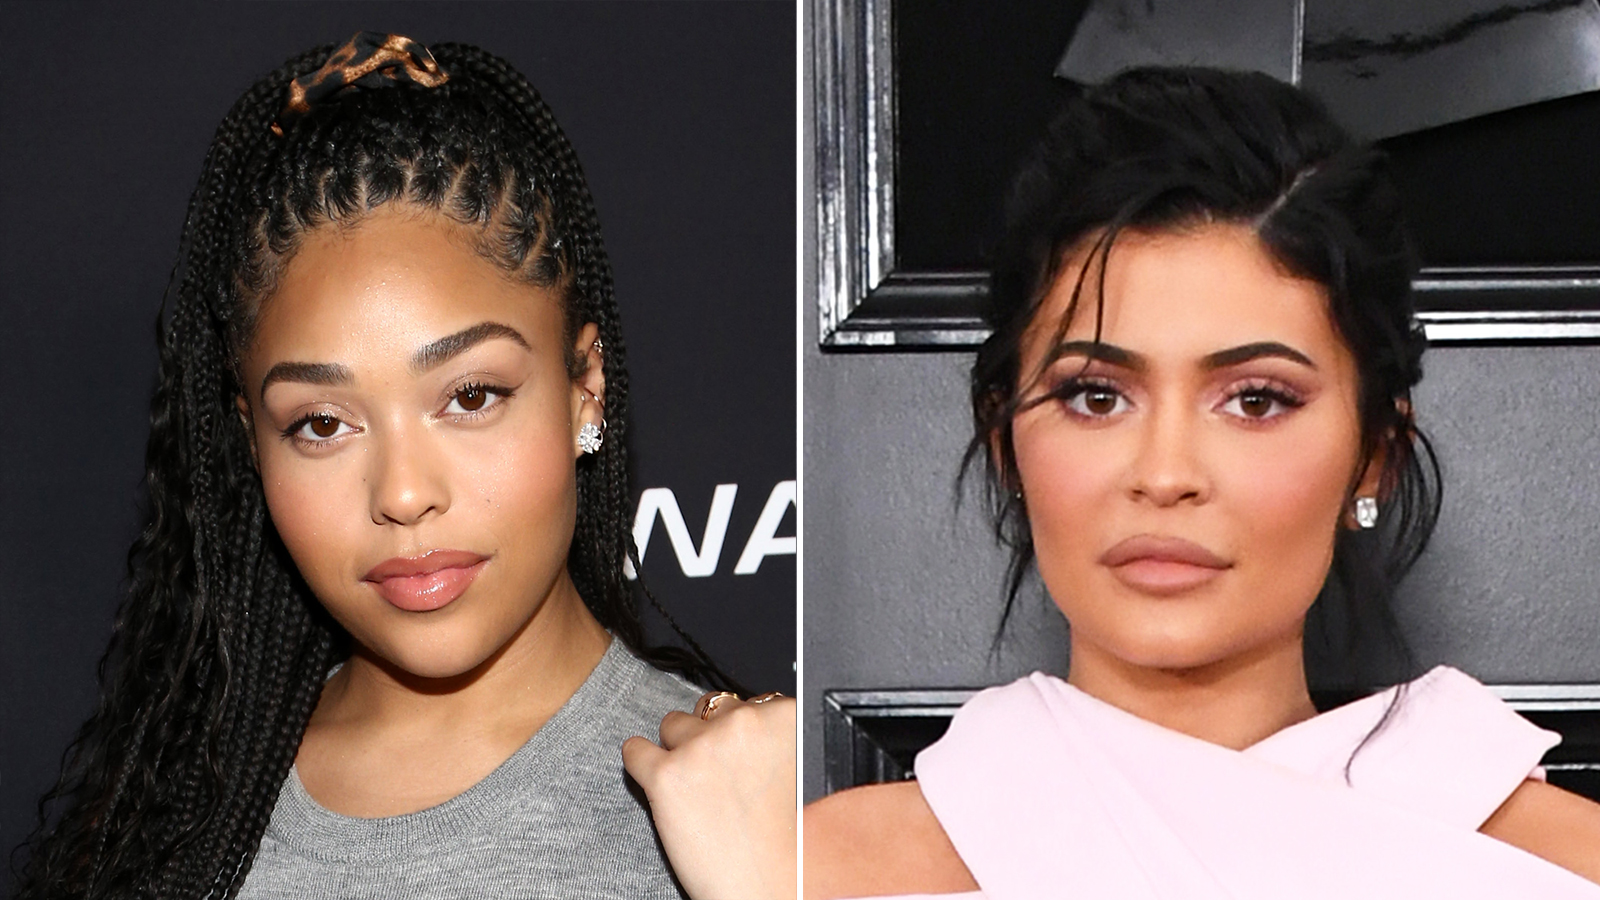 Kylie Jenner and Jordyn Woods make first social media appearance together  in 4 years